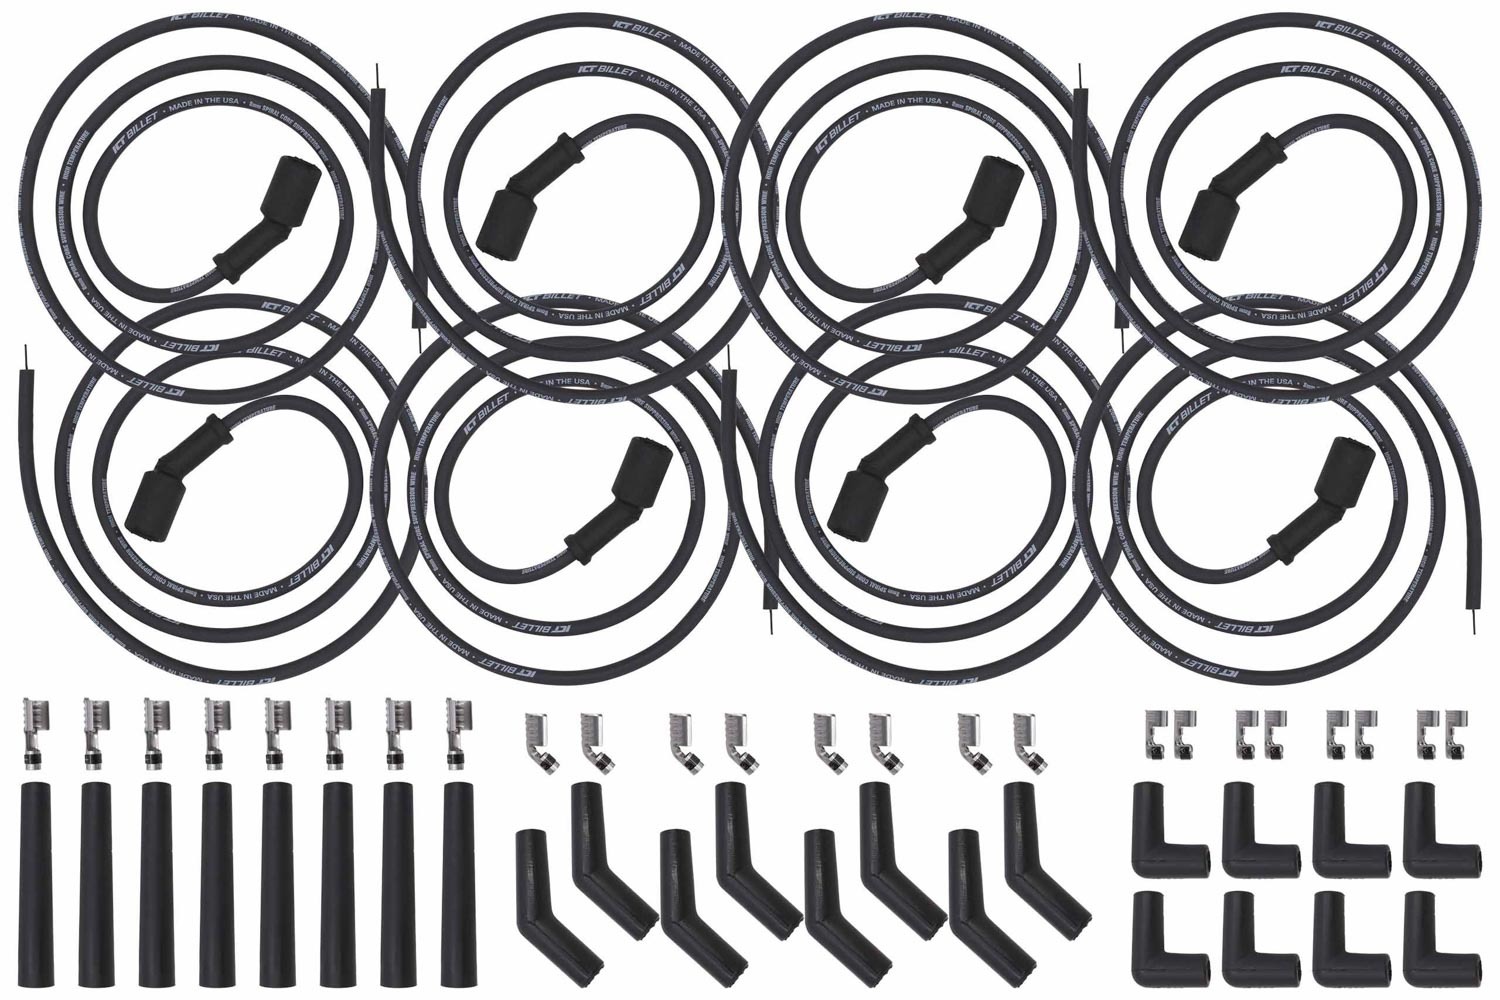 ICT BILLET Spark Plug Wire Set, Spiral Core, 8 mm, Black, Factory Style Boots/Te